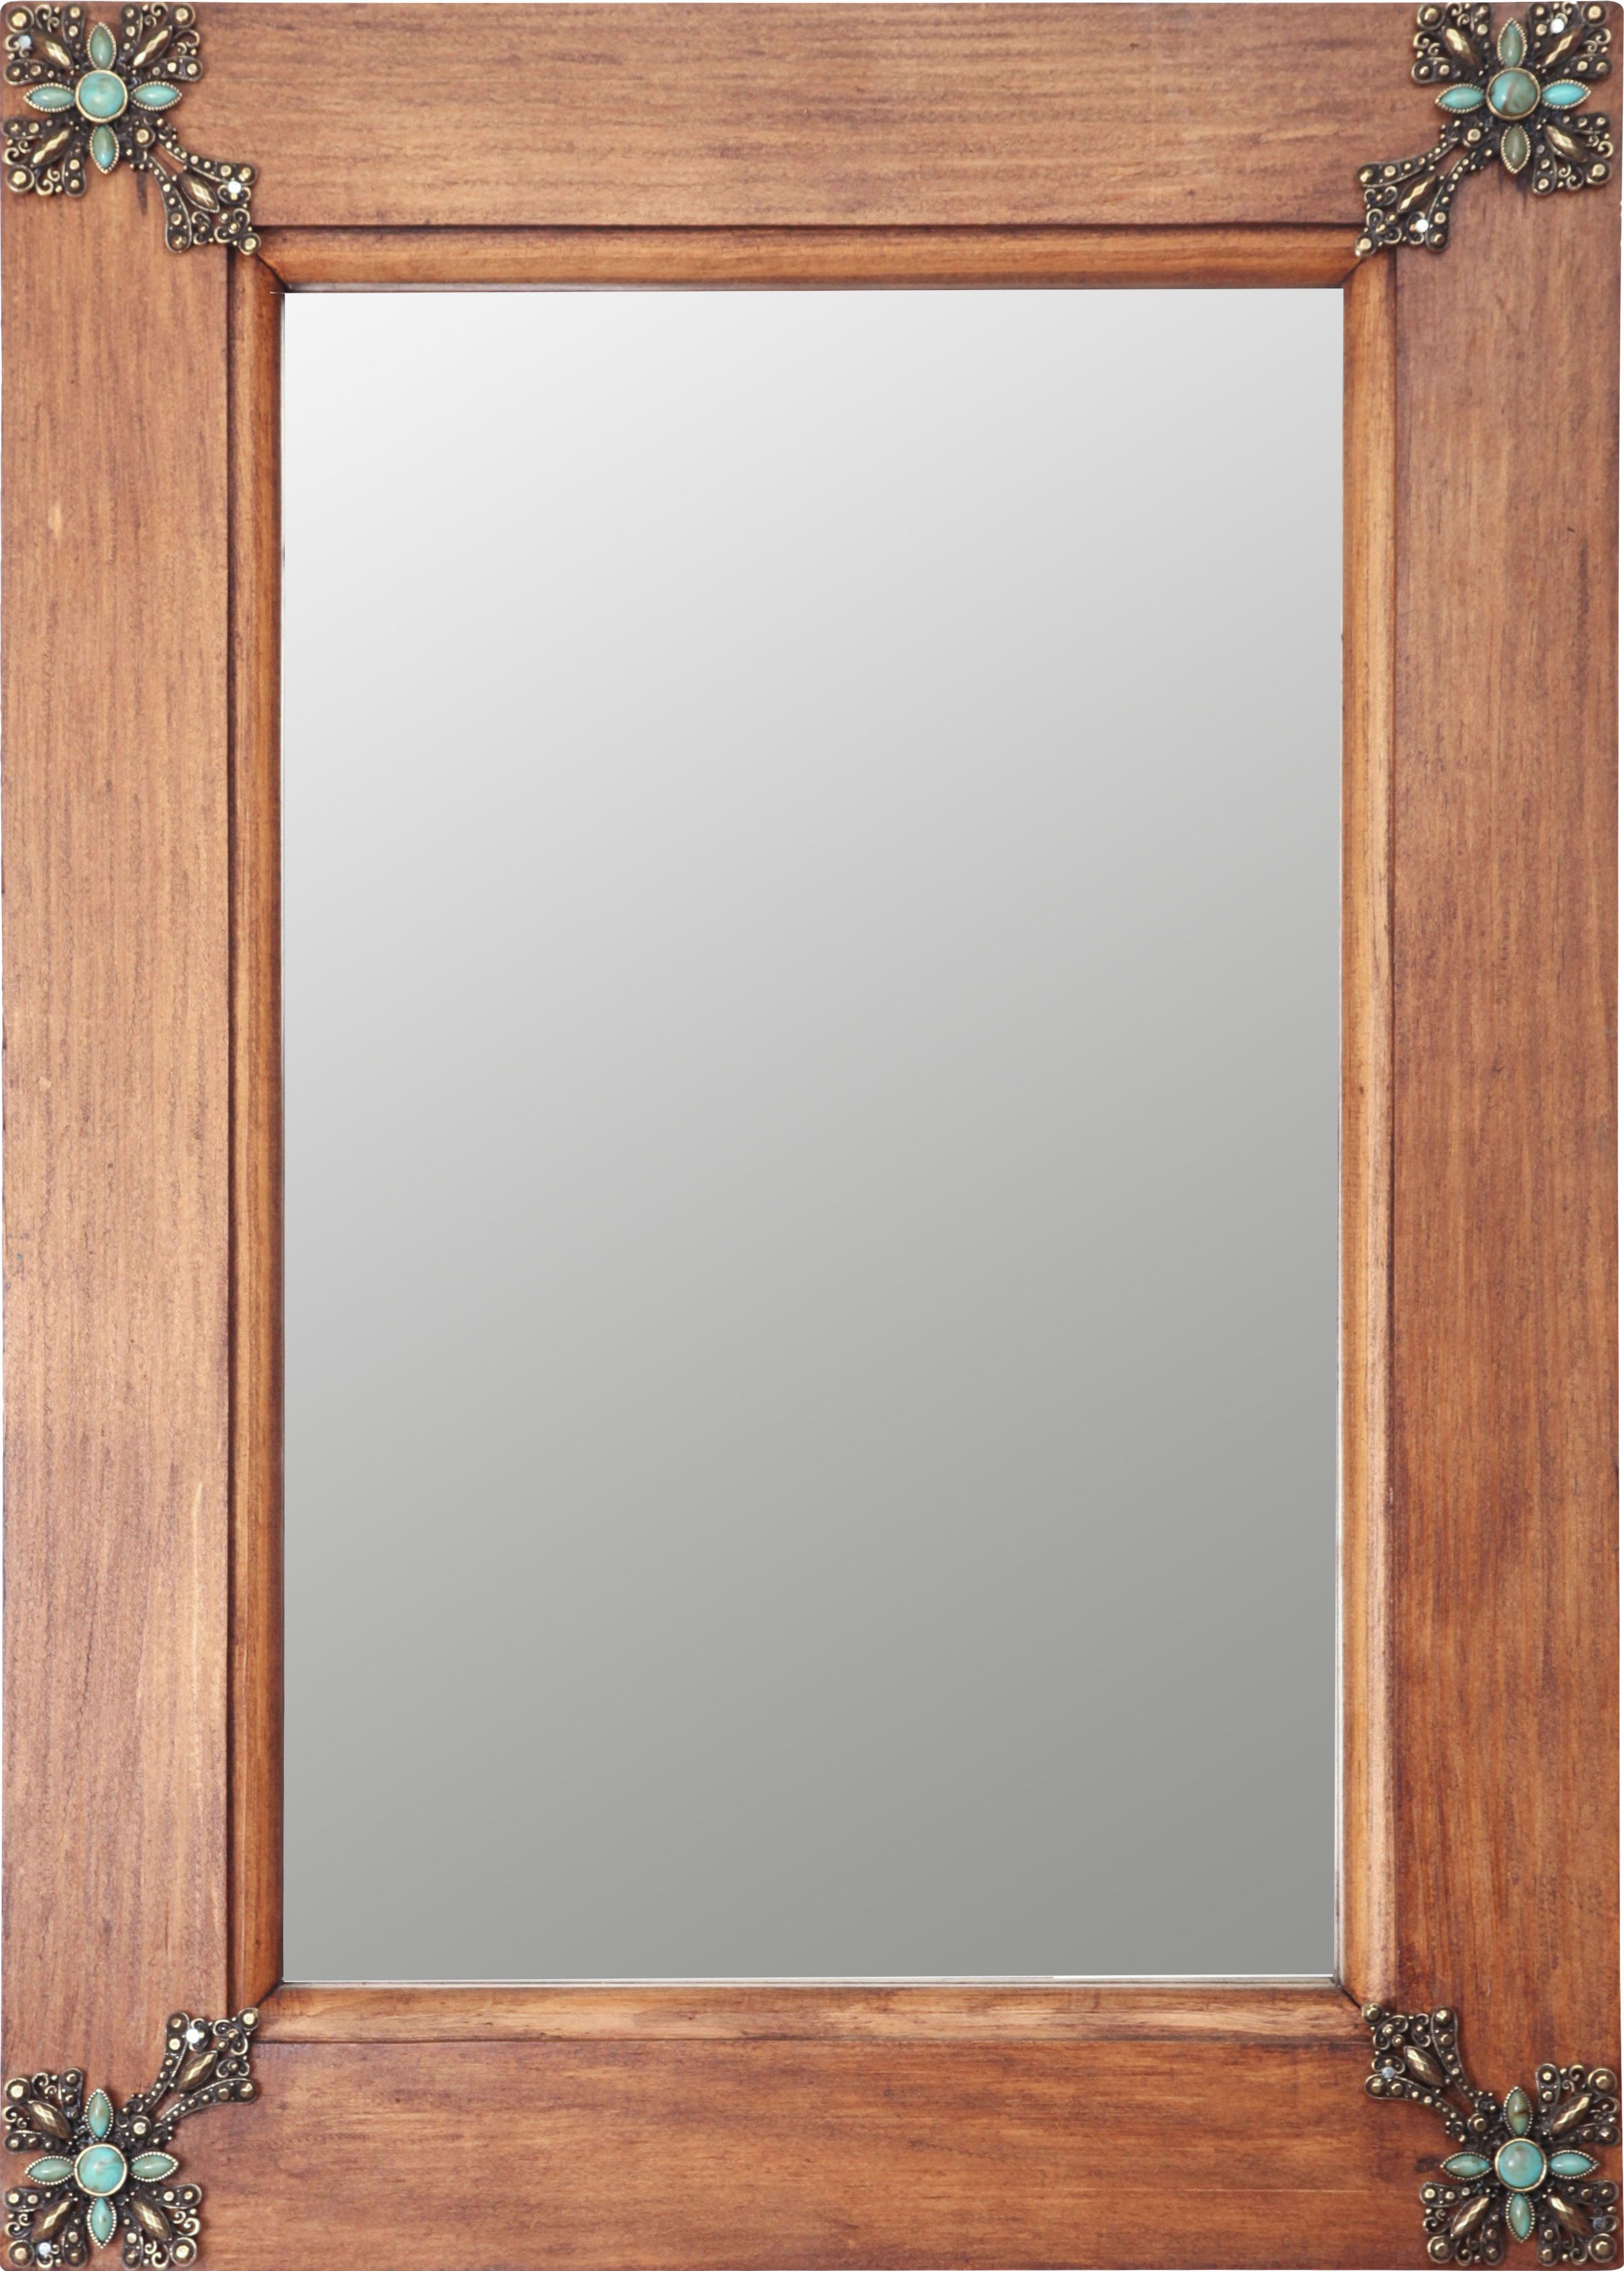 Myamigosimports Concho Cross Rustic Accent Mirror & Reviews Pertaining To Lajoie Rustic Accent Mirrors (View 5 of 20)